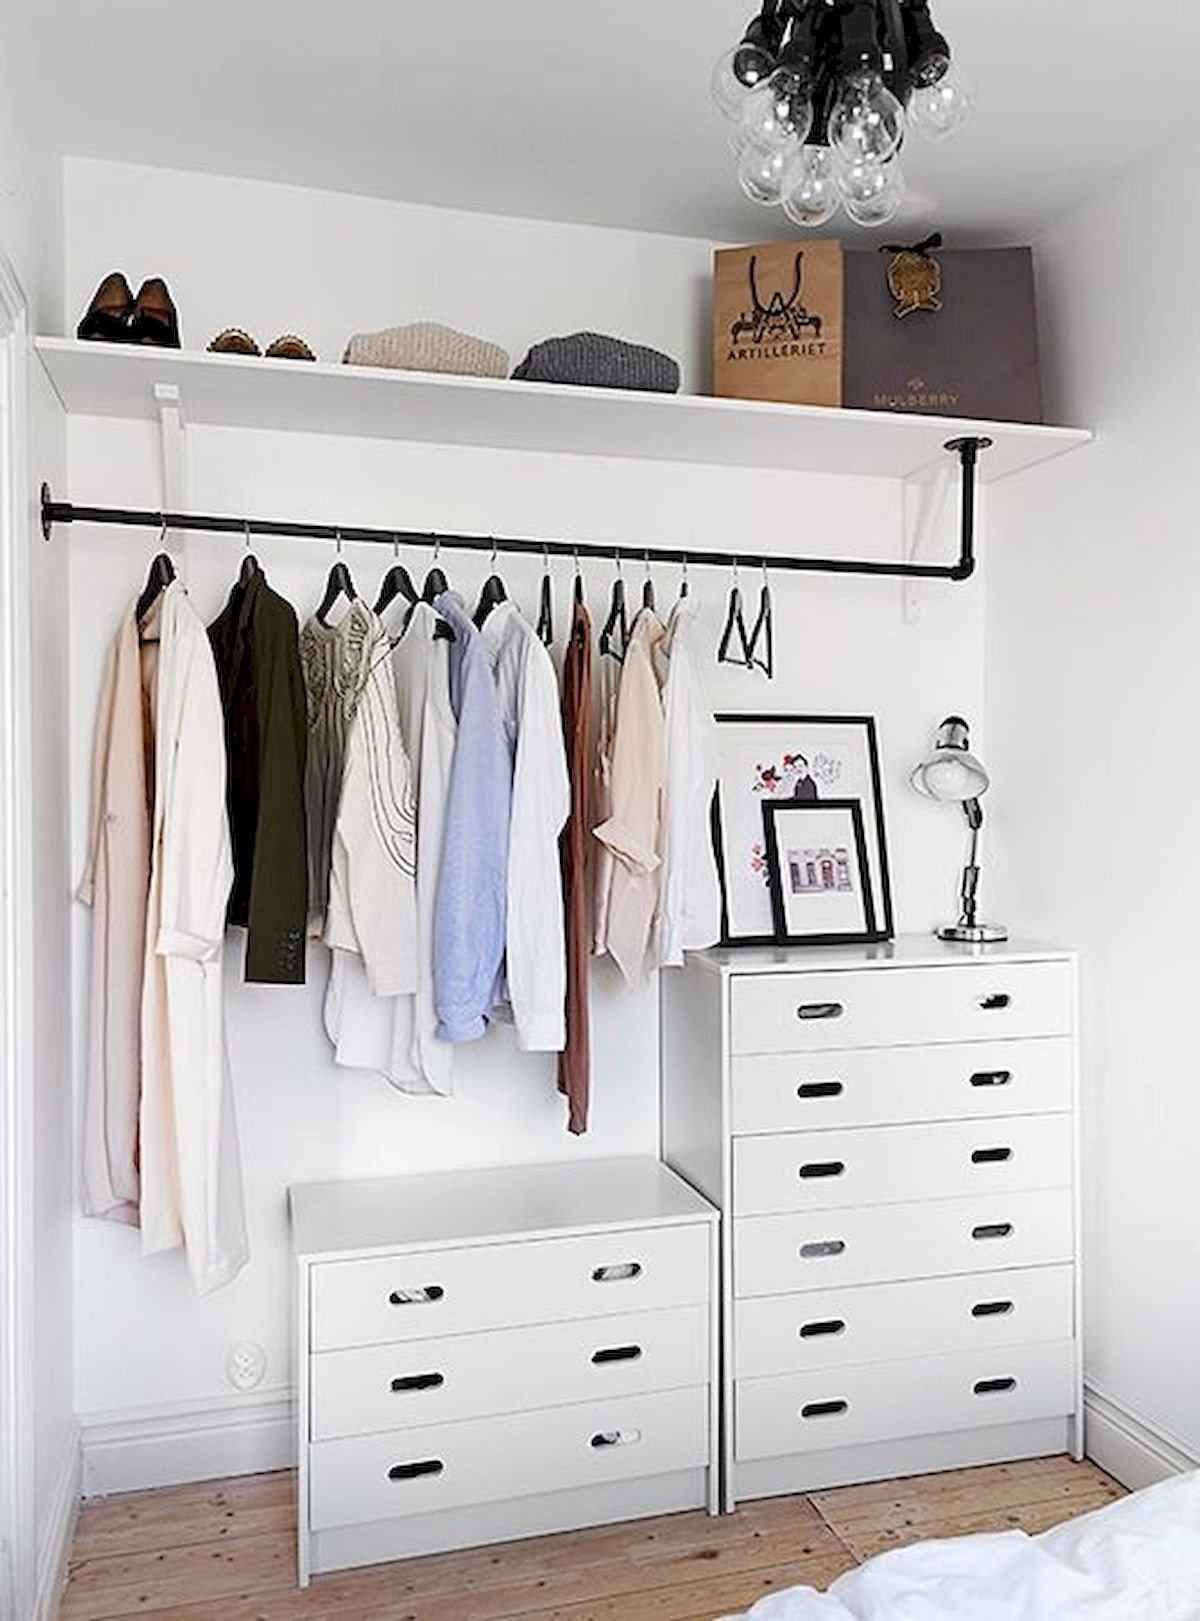 Wardrobes for hanging clothes 2